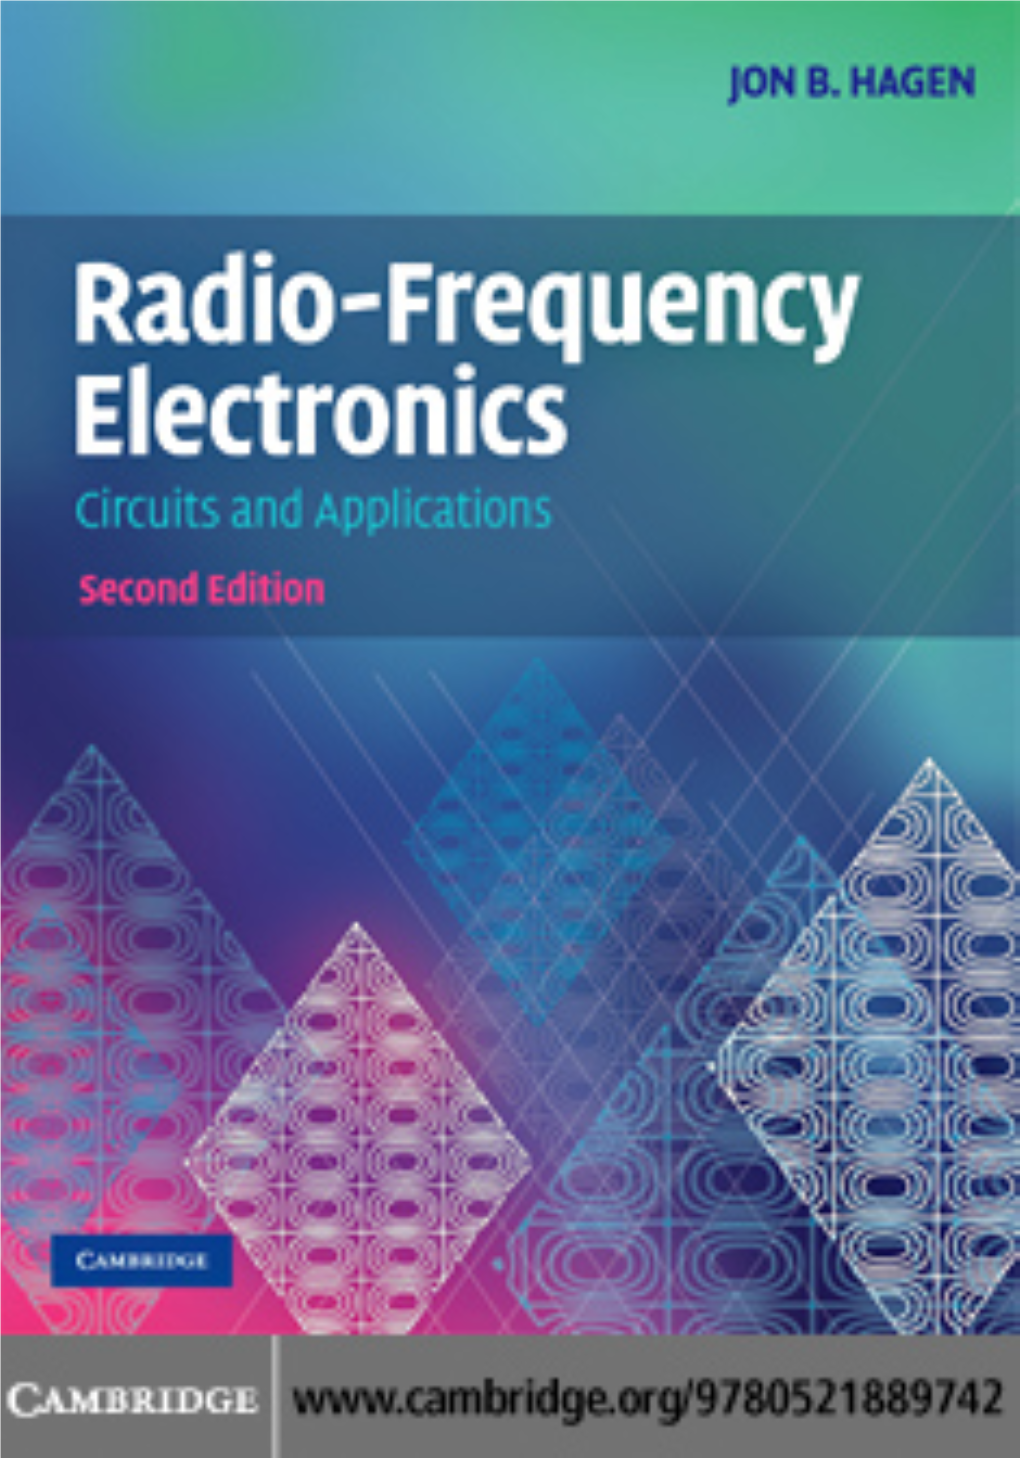 Radio-Frequency Electronics Circuits and Applications